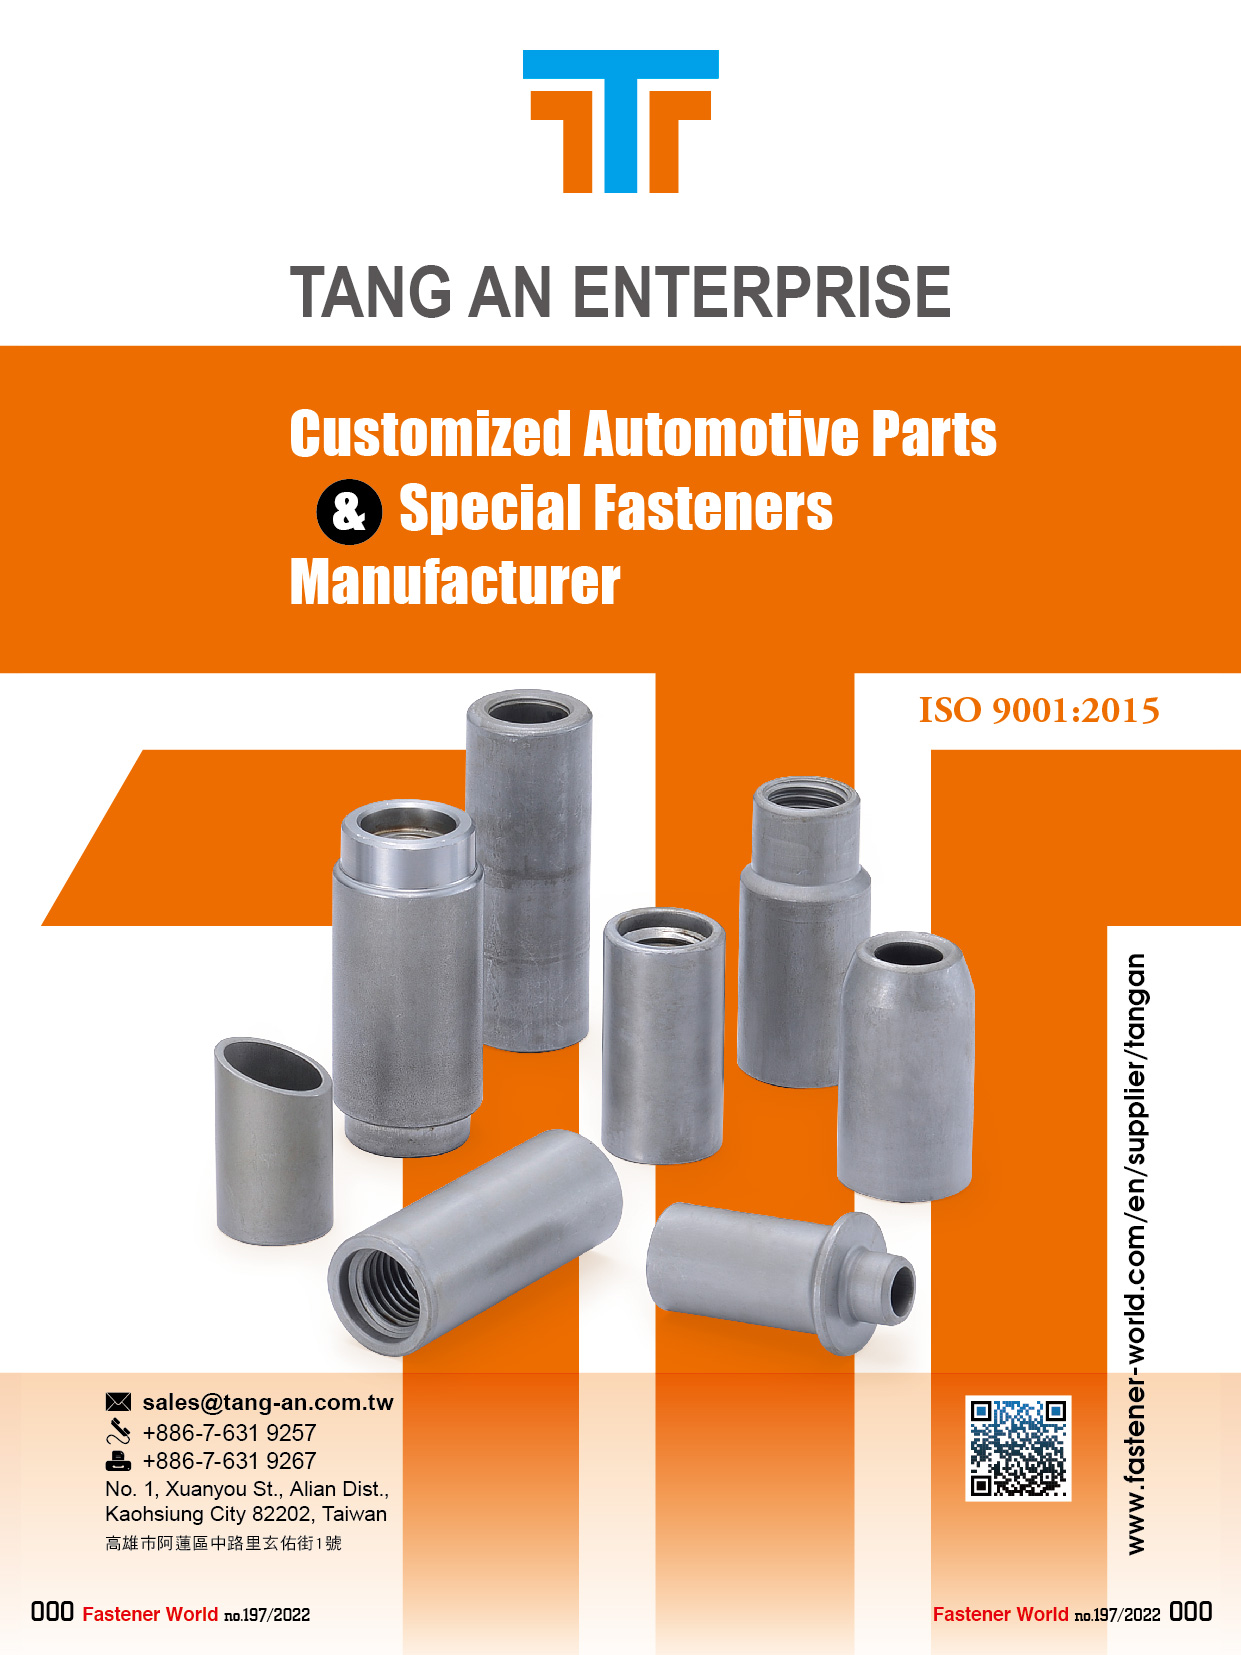  Customized Automotive Parts, Special Fasteners